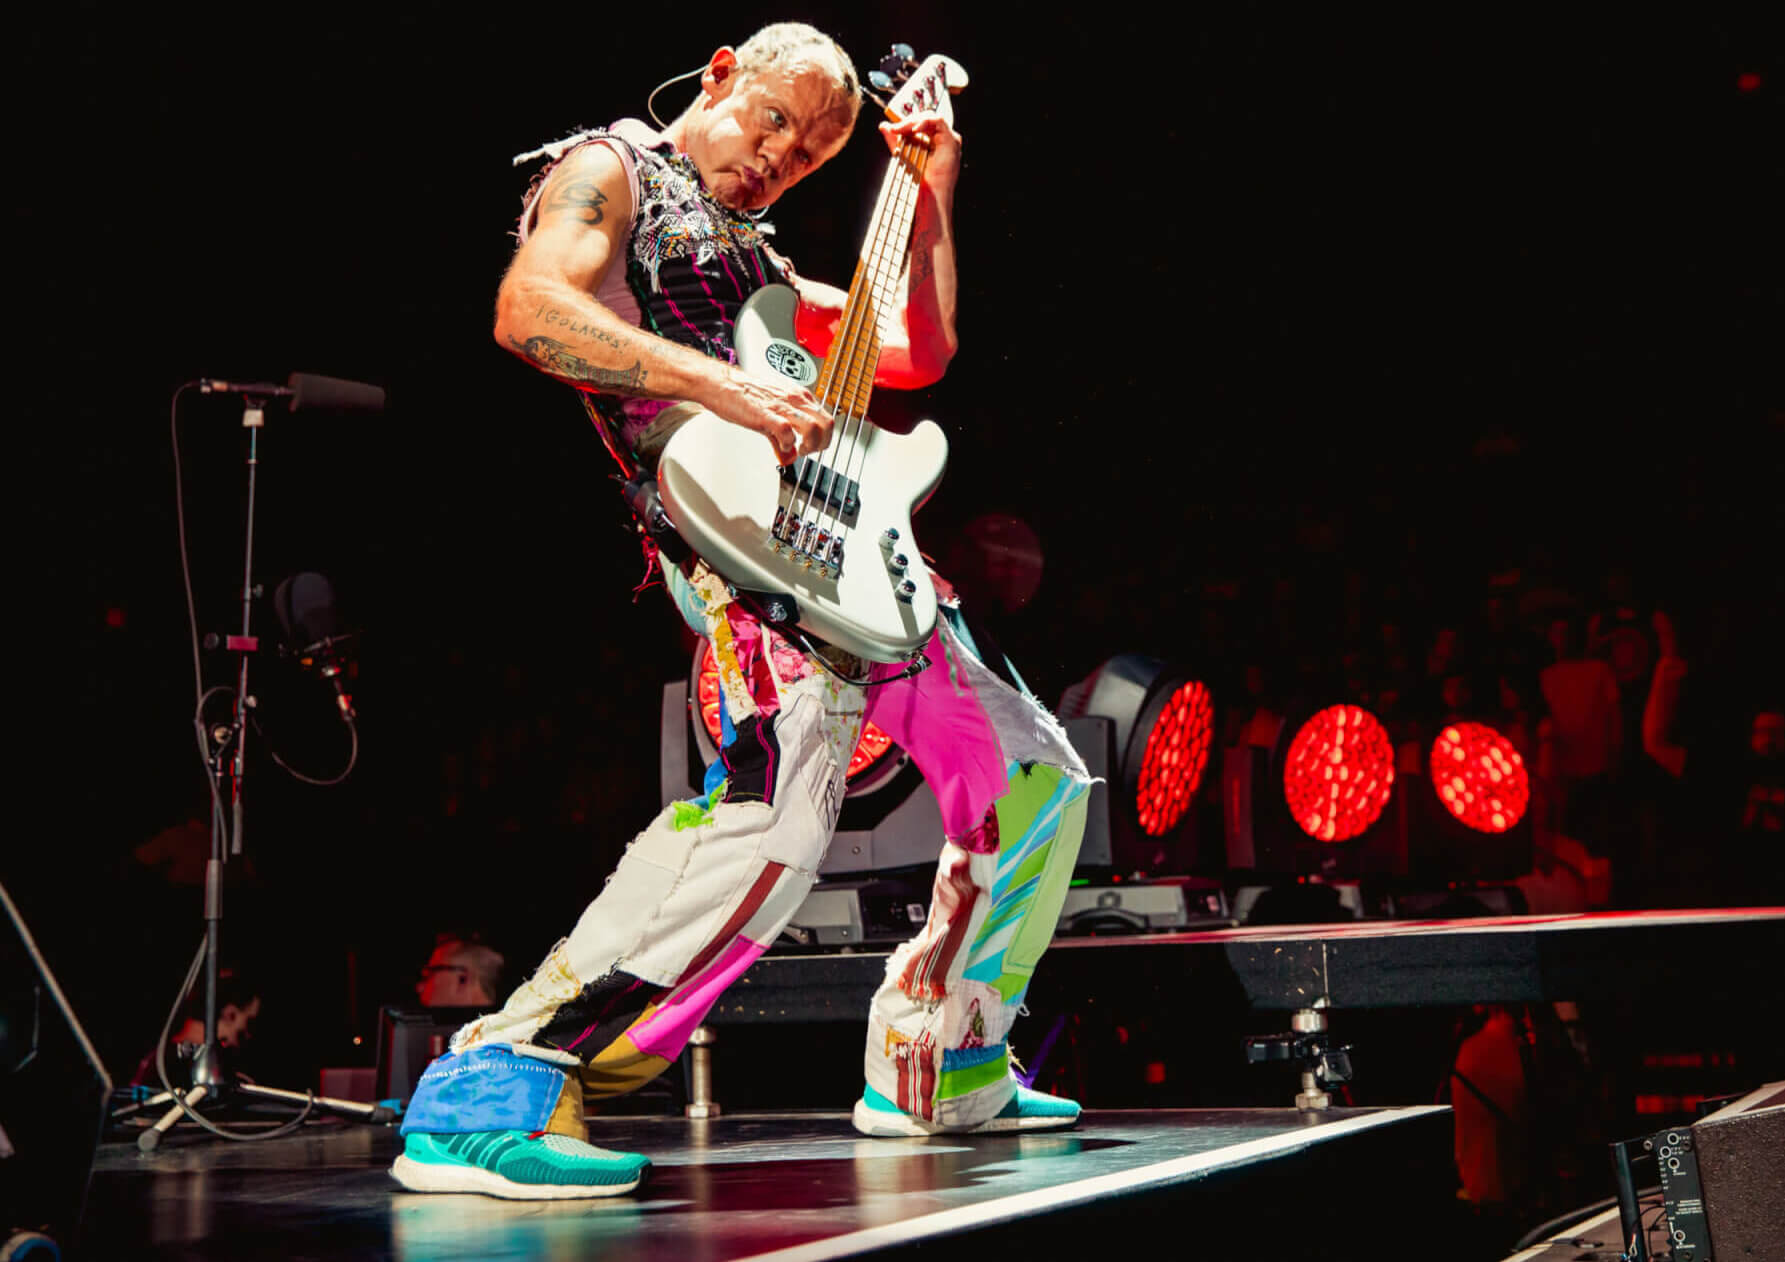 Red Hot Chili Peppers' bassist, Flea